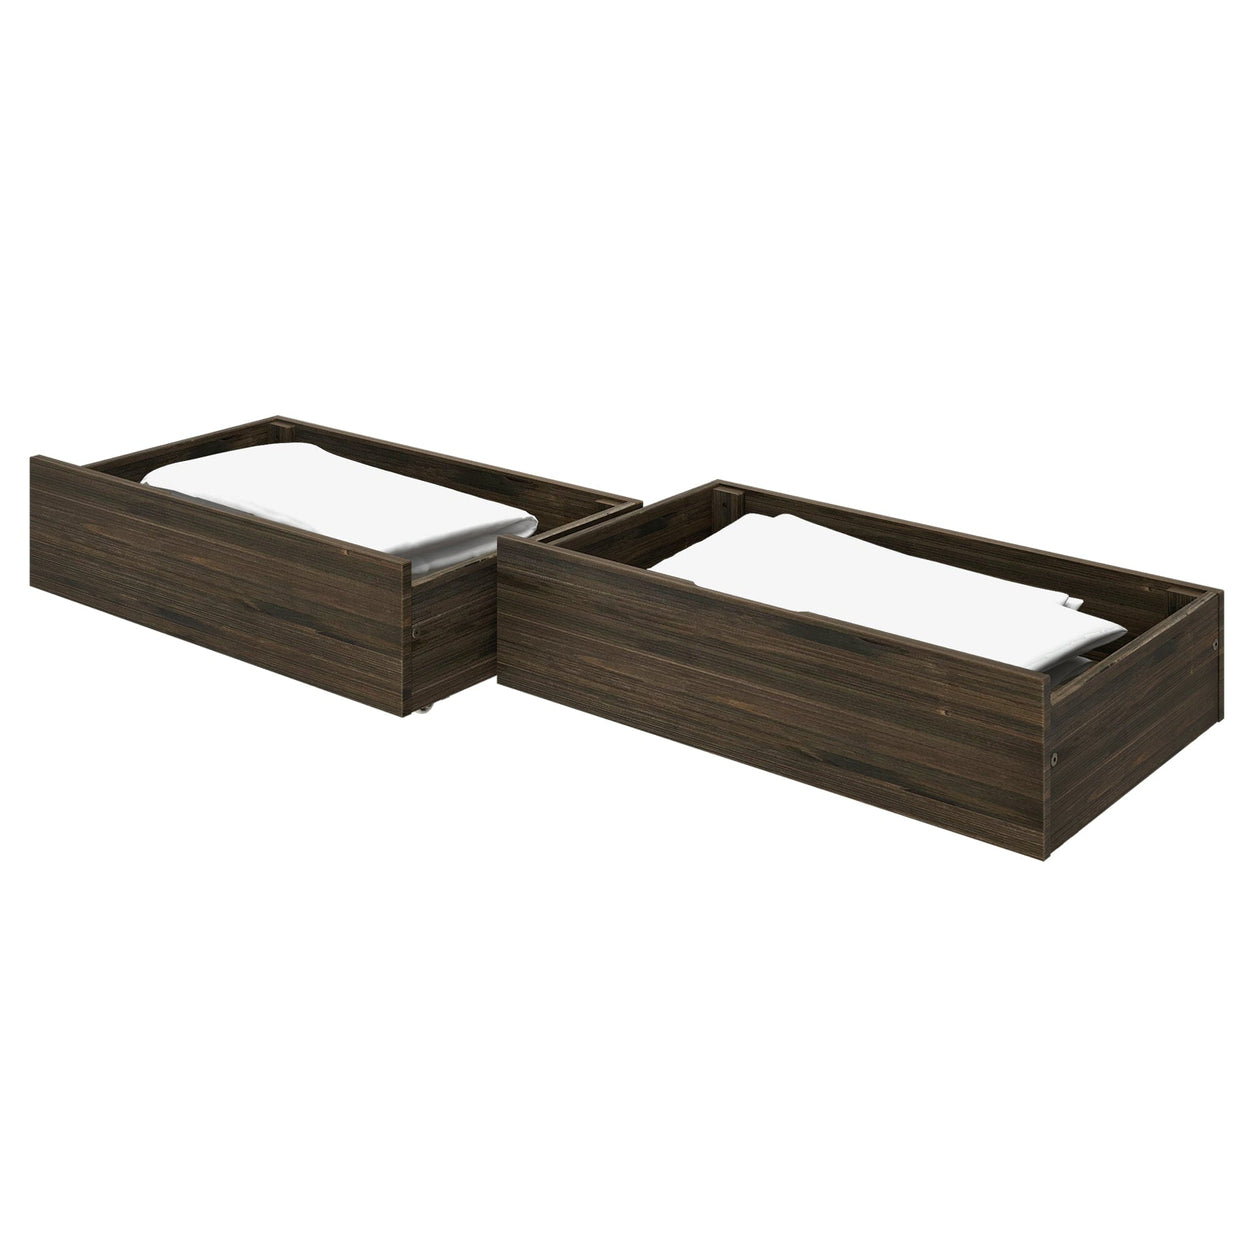 190362-181 : Accessories Farmhouse Full XL & Queen Storage Drawers, Barnwood Brown